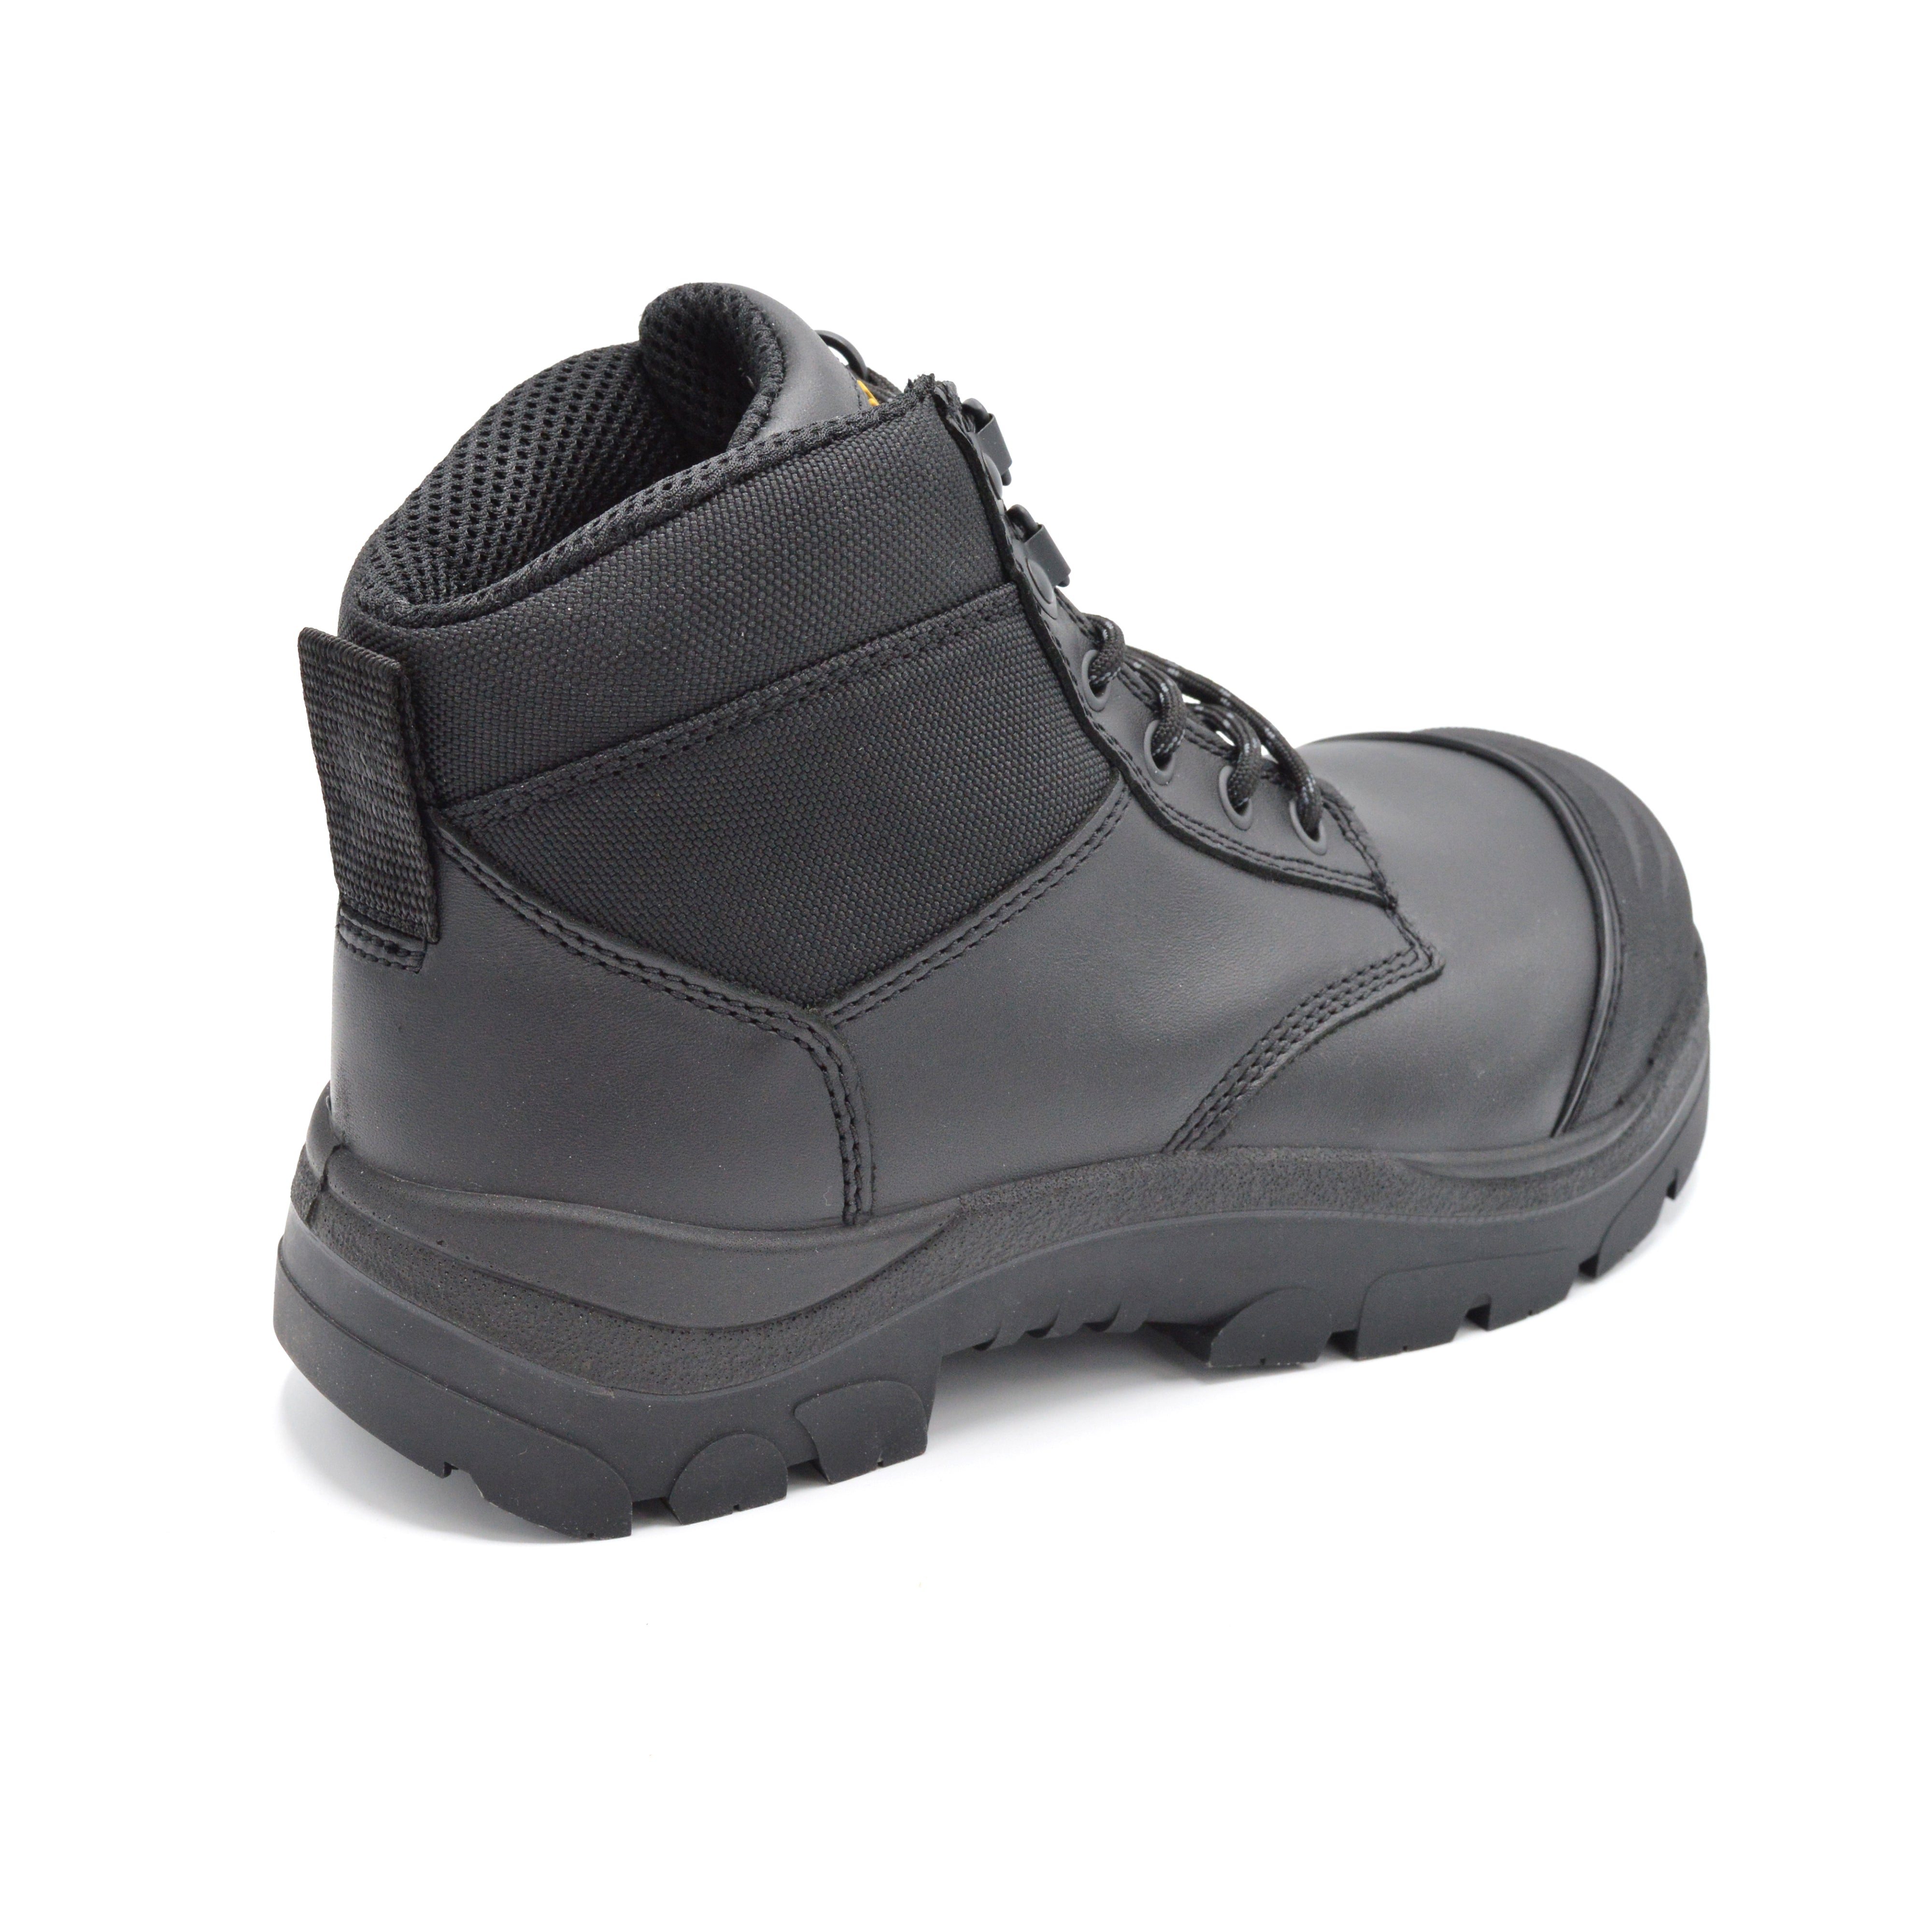 Men's Lace-up Safety Boots For Orthotics